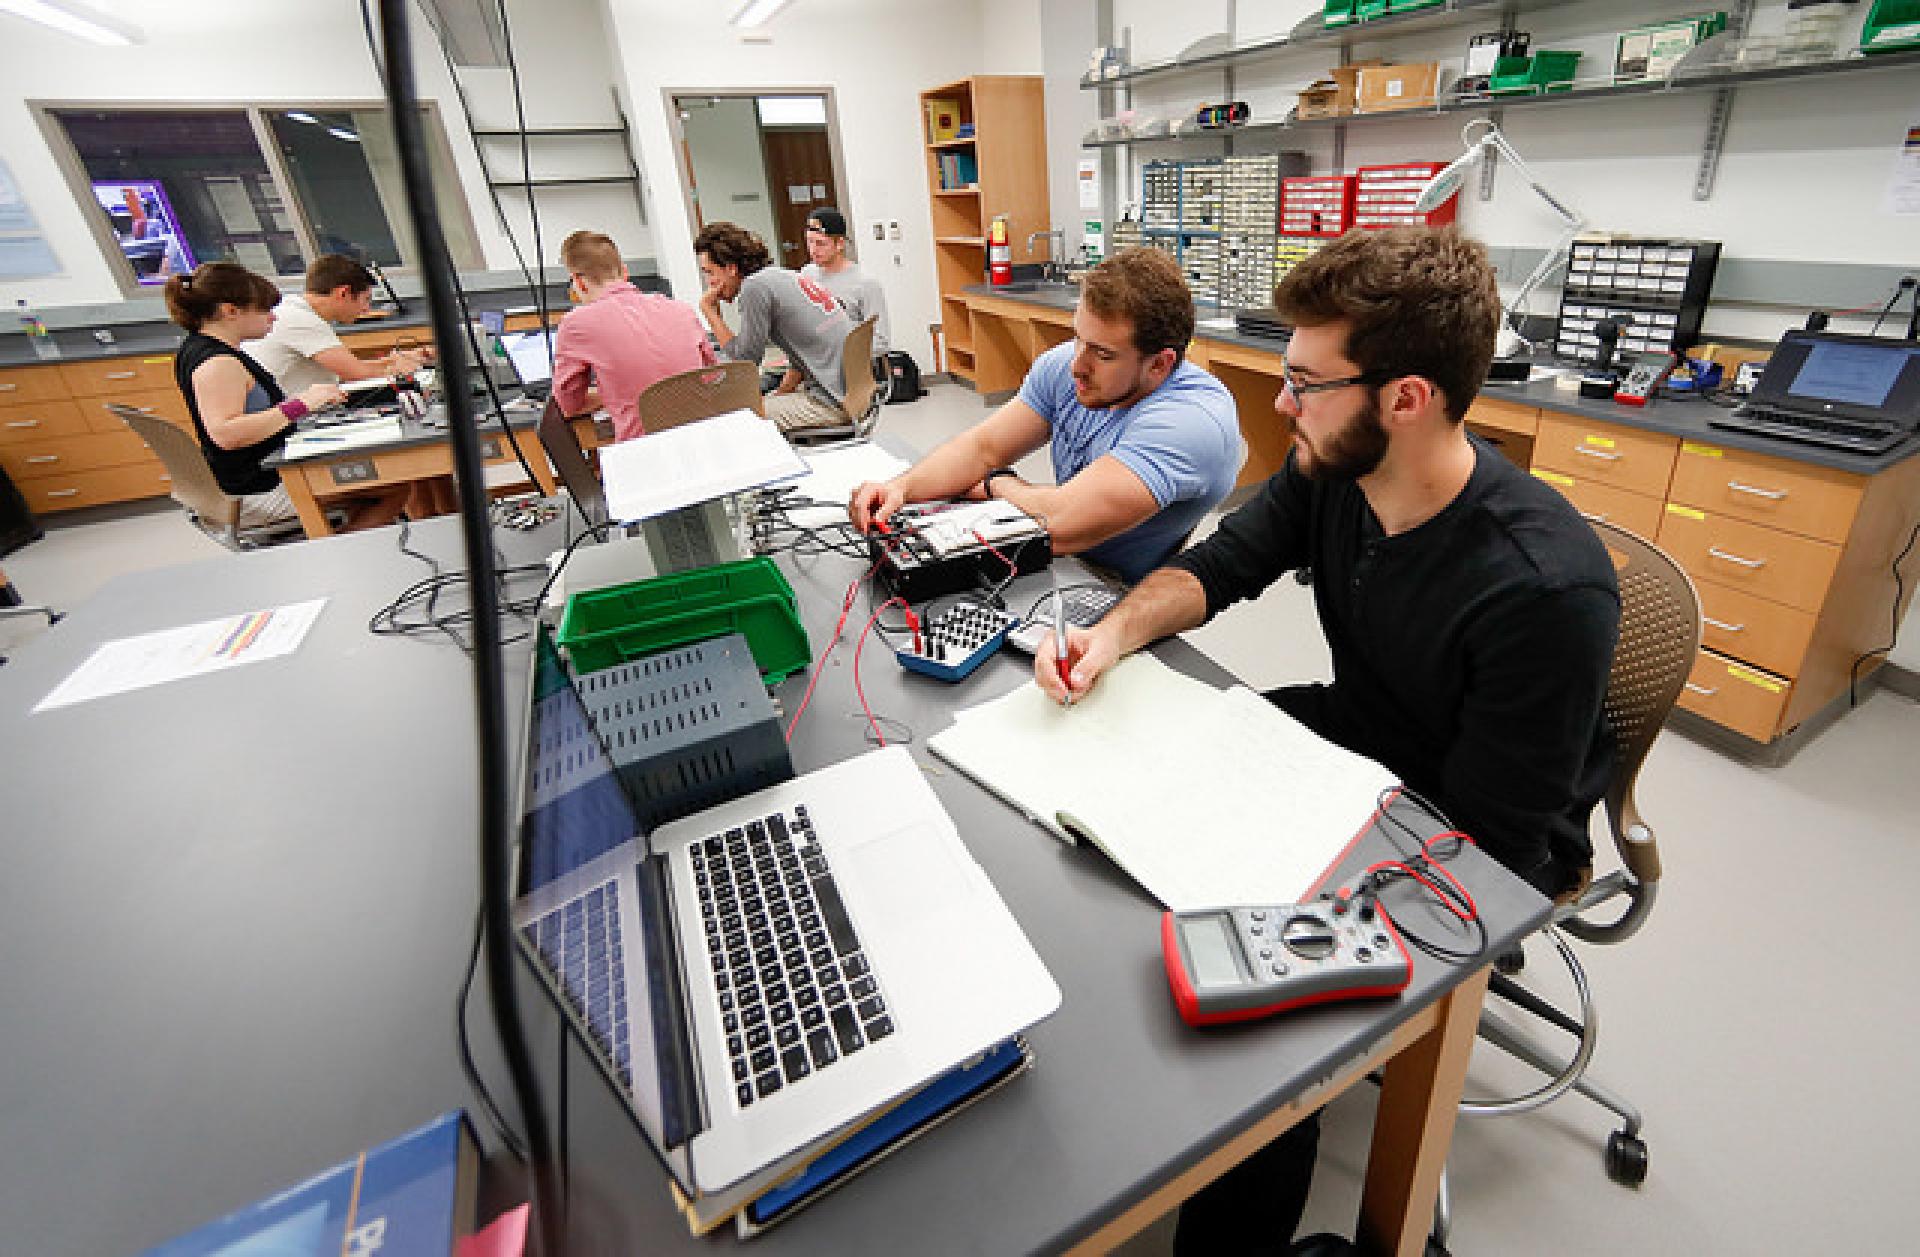 Engineering students work in the Dr. Myron Wentz Science Center at North Central College